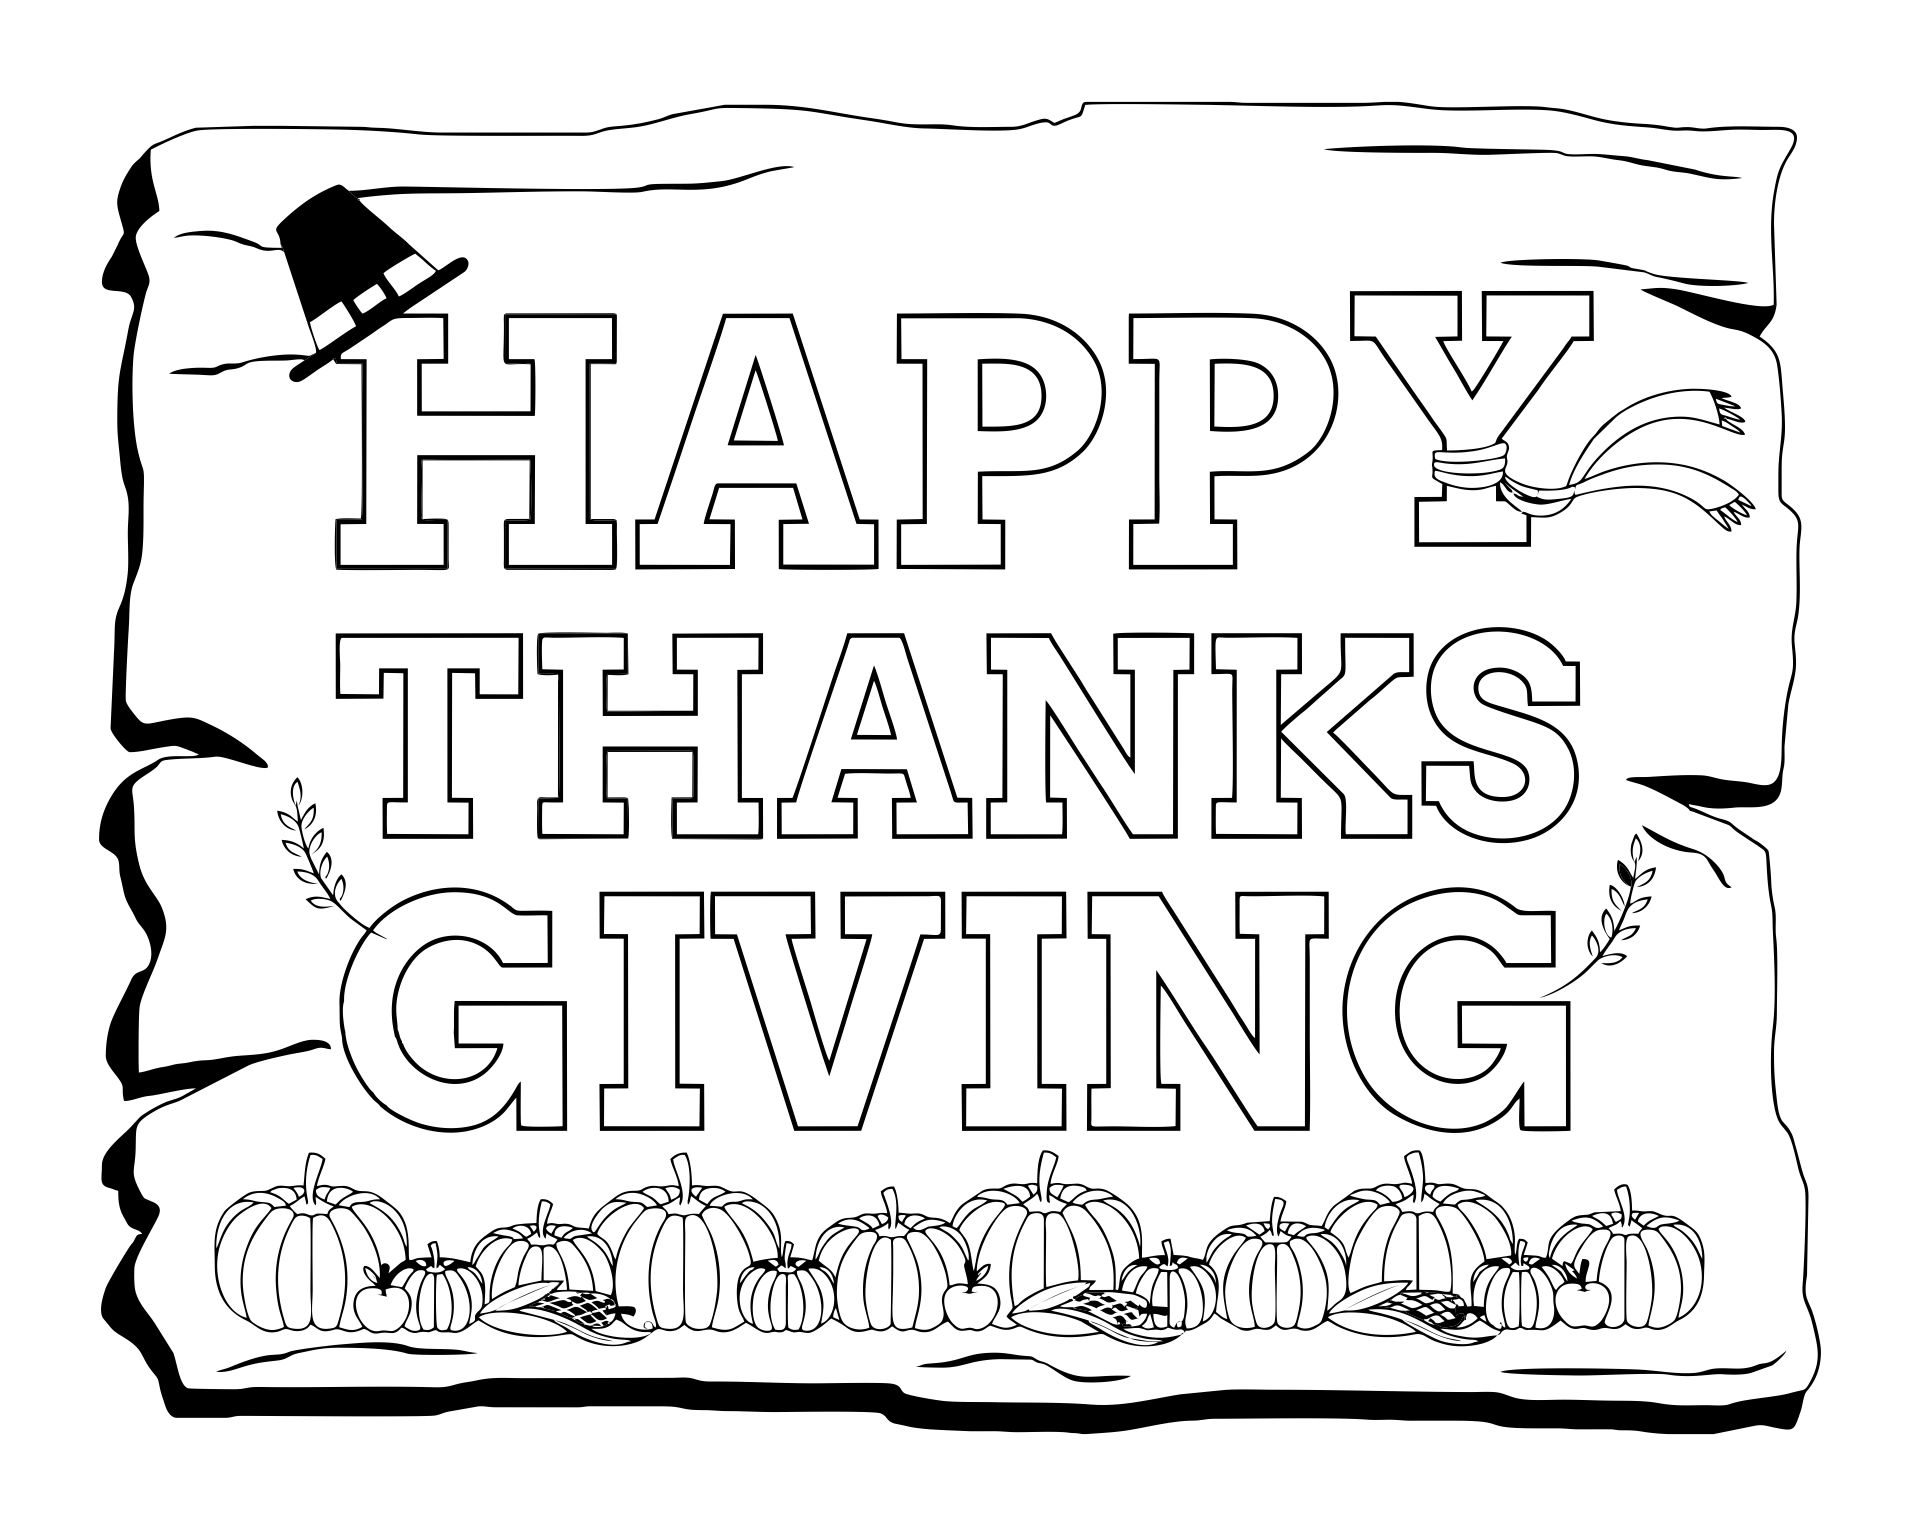 Printable Happy Thanksgiving Coloring Pages